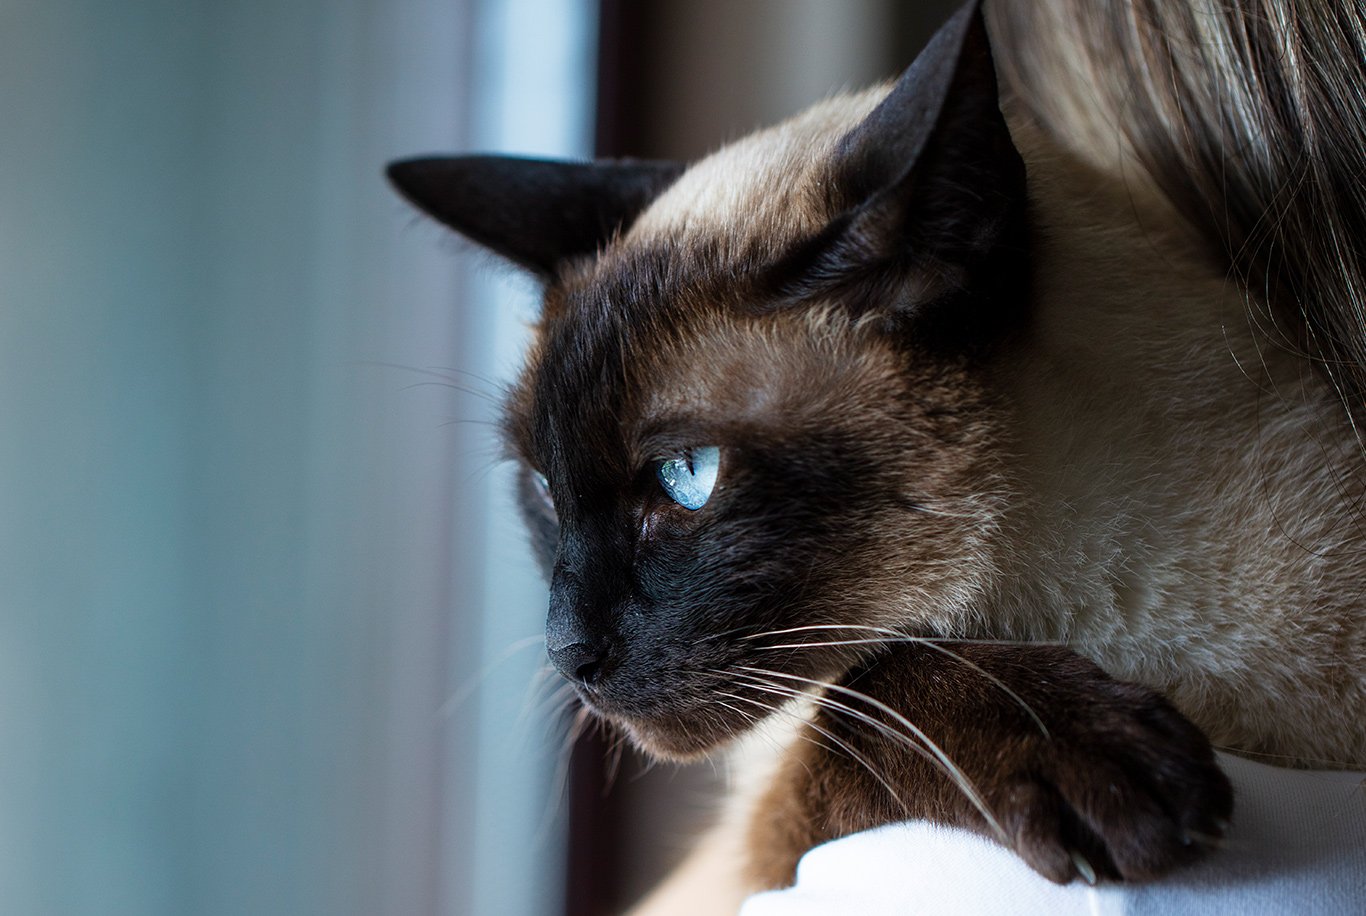 IV. Factors That Contribute to Siamese Cats' Sensitive Stomachs